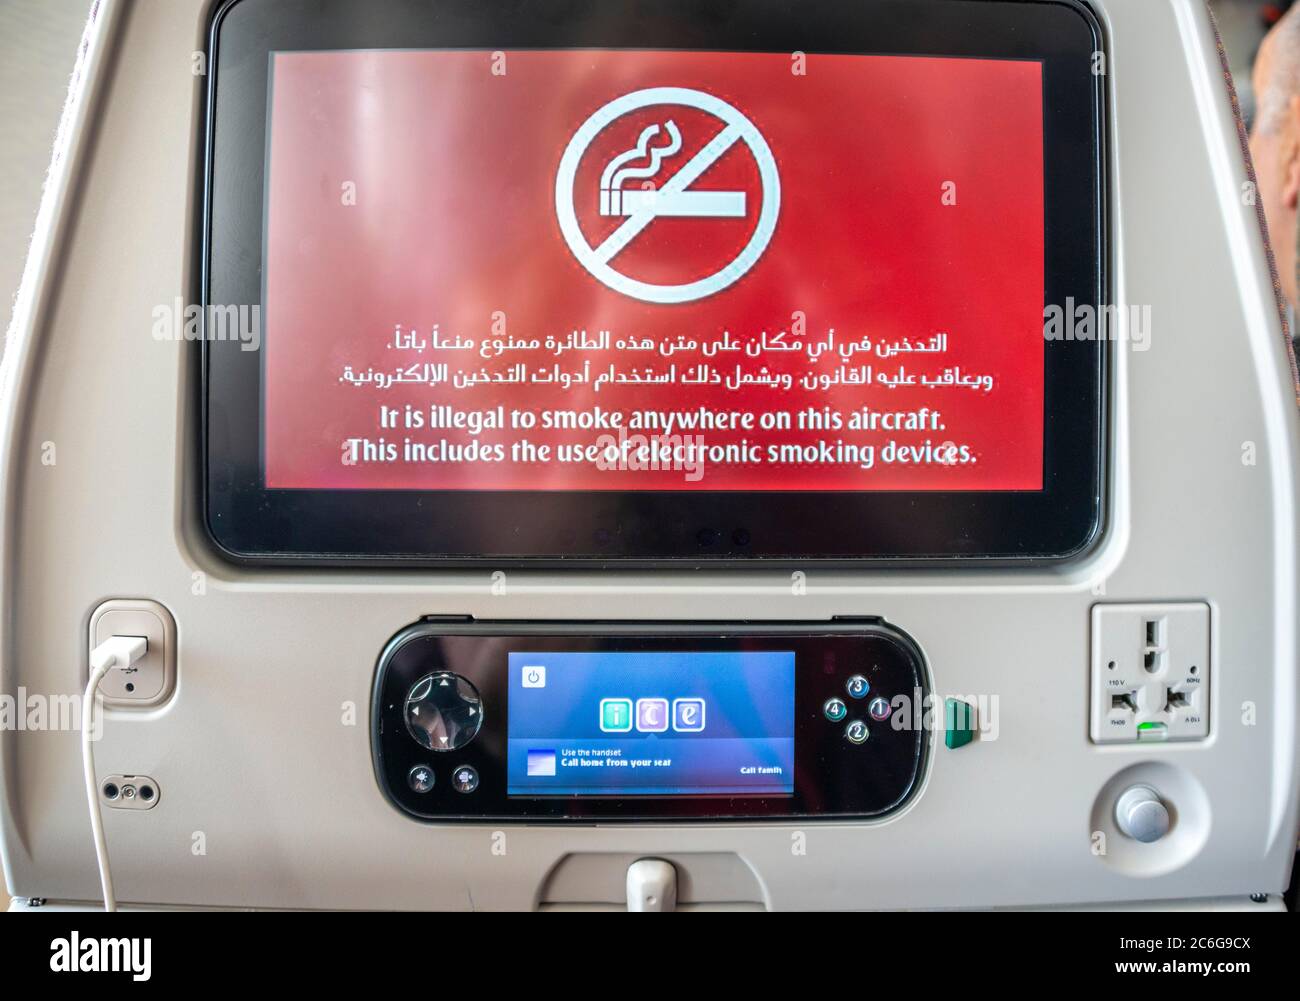 Screen with display smoking ban in Arabic and English on backrest in aircraft, Emirates airline, interior, Dubai, United Arab Emirates Stock Photo